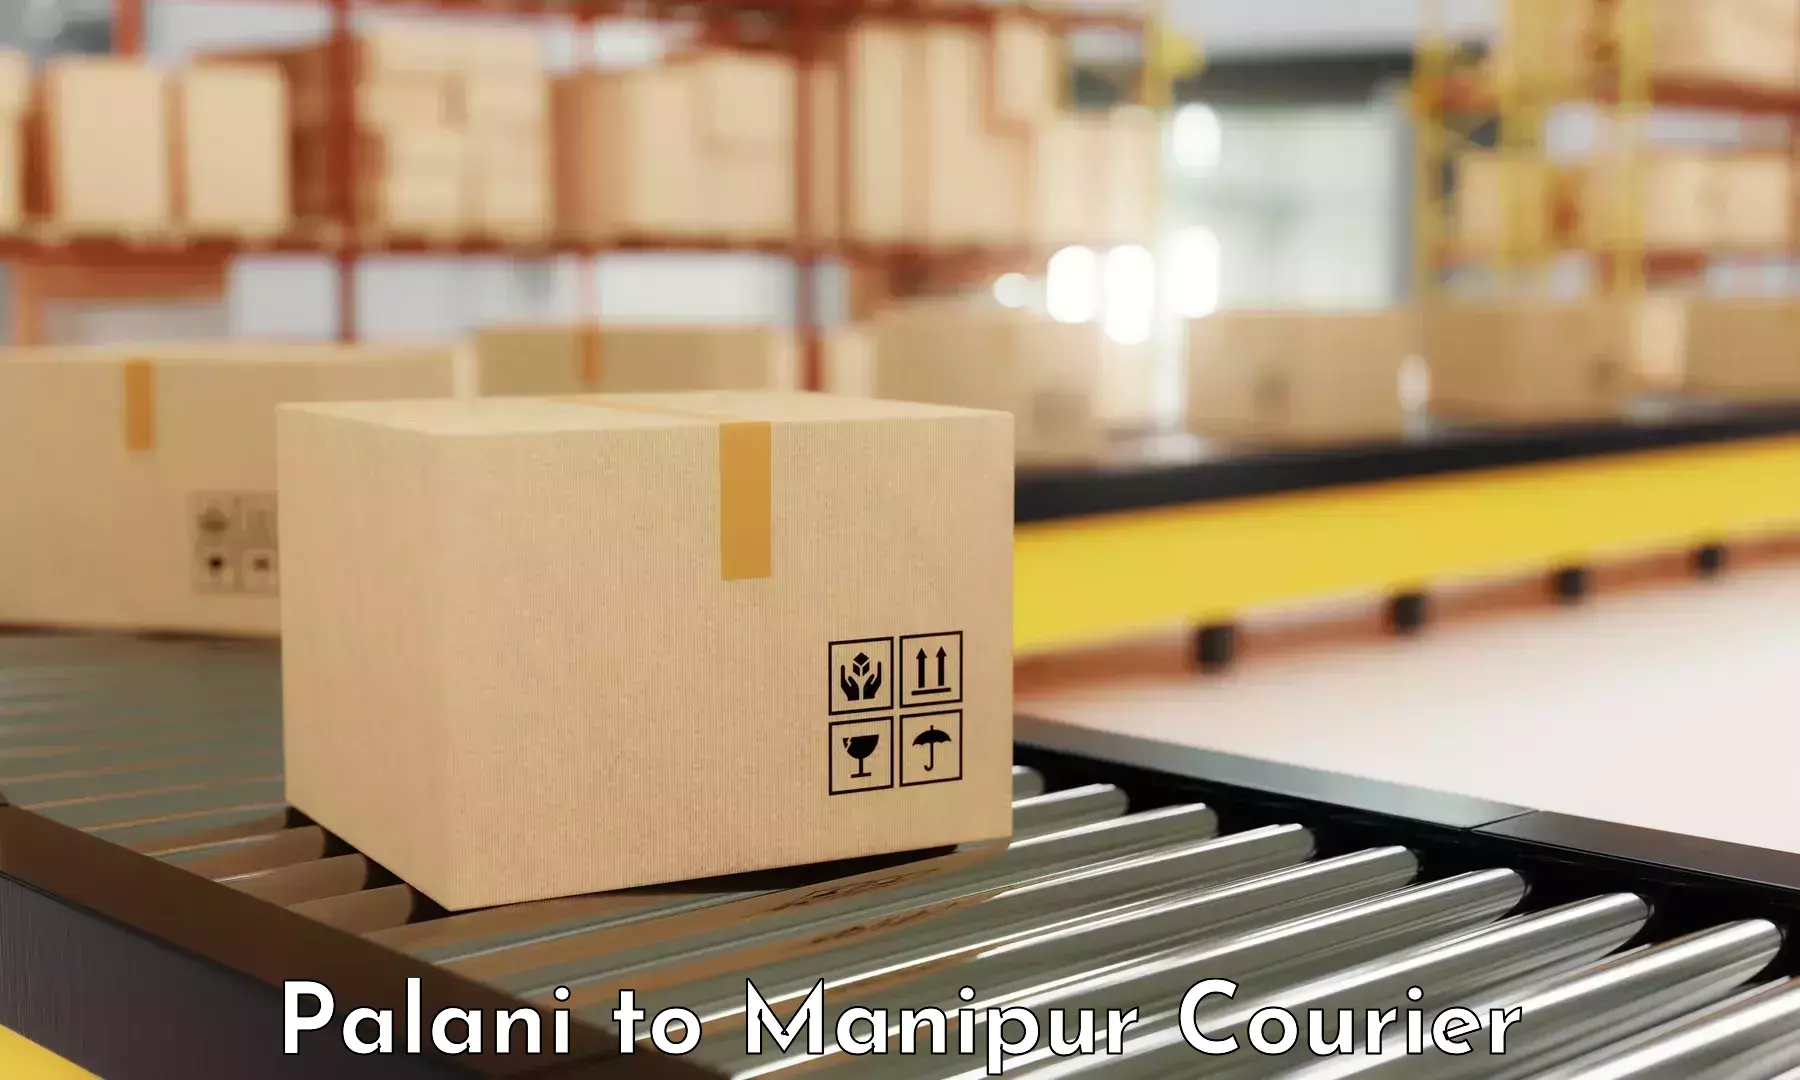 Local delivery service Palani to Manipur